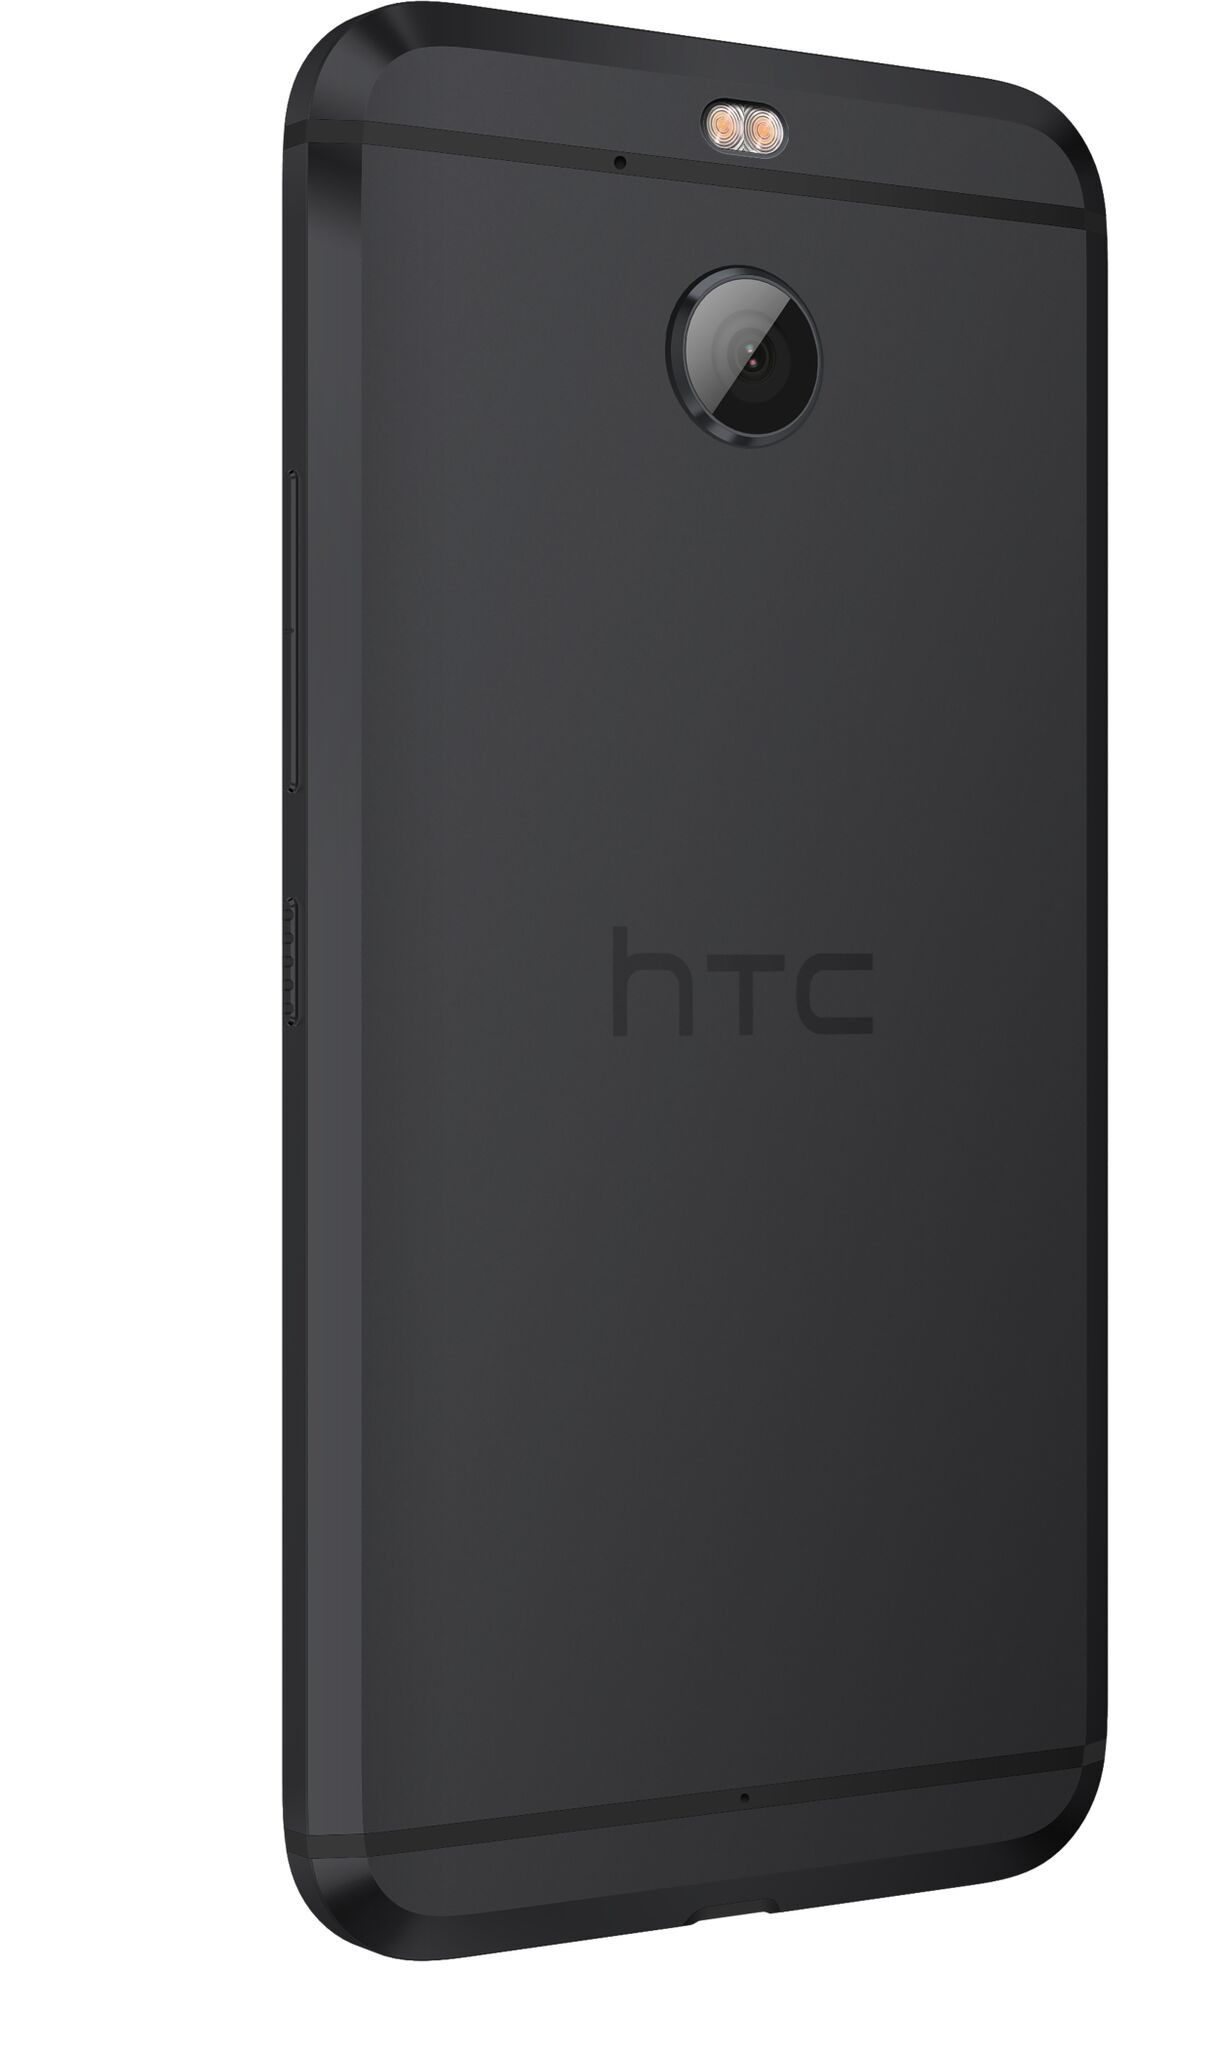 1478848304_the-htc-bolt-is-official-8.jpg